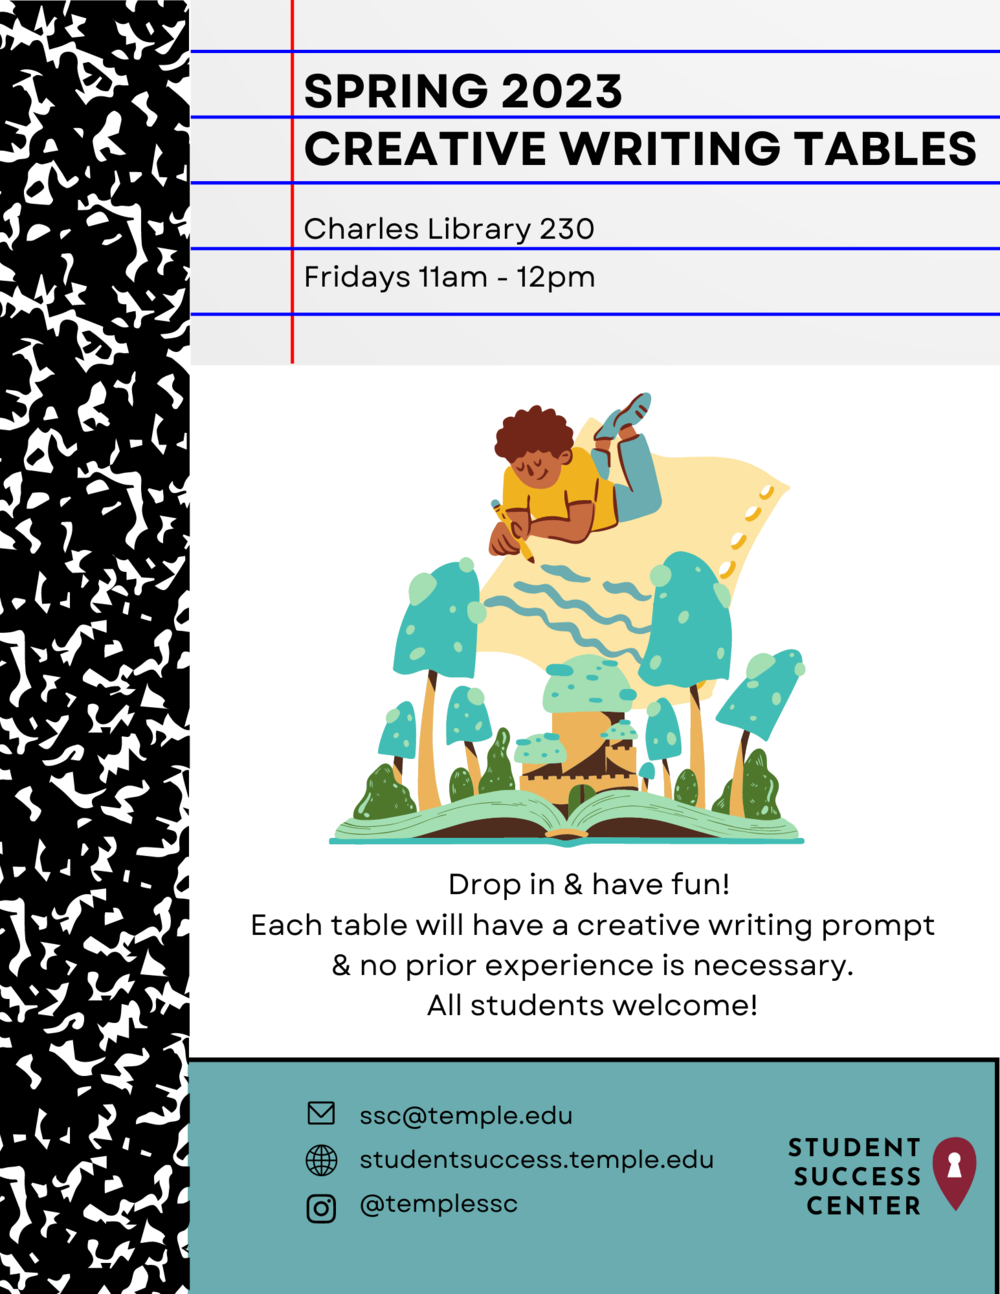 Flier for Creative Writing Tables, Fridays 11-12 in Charles 230 (Student Success Center)